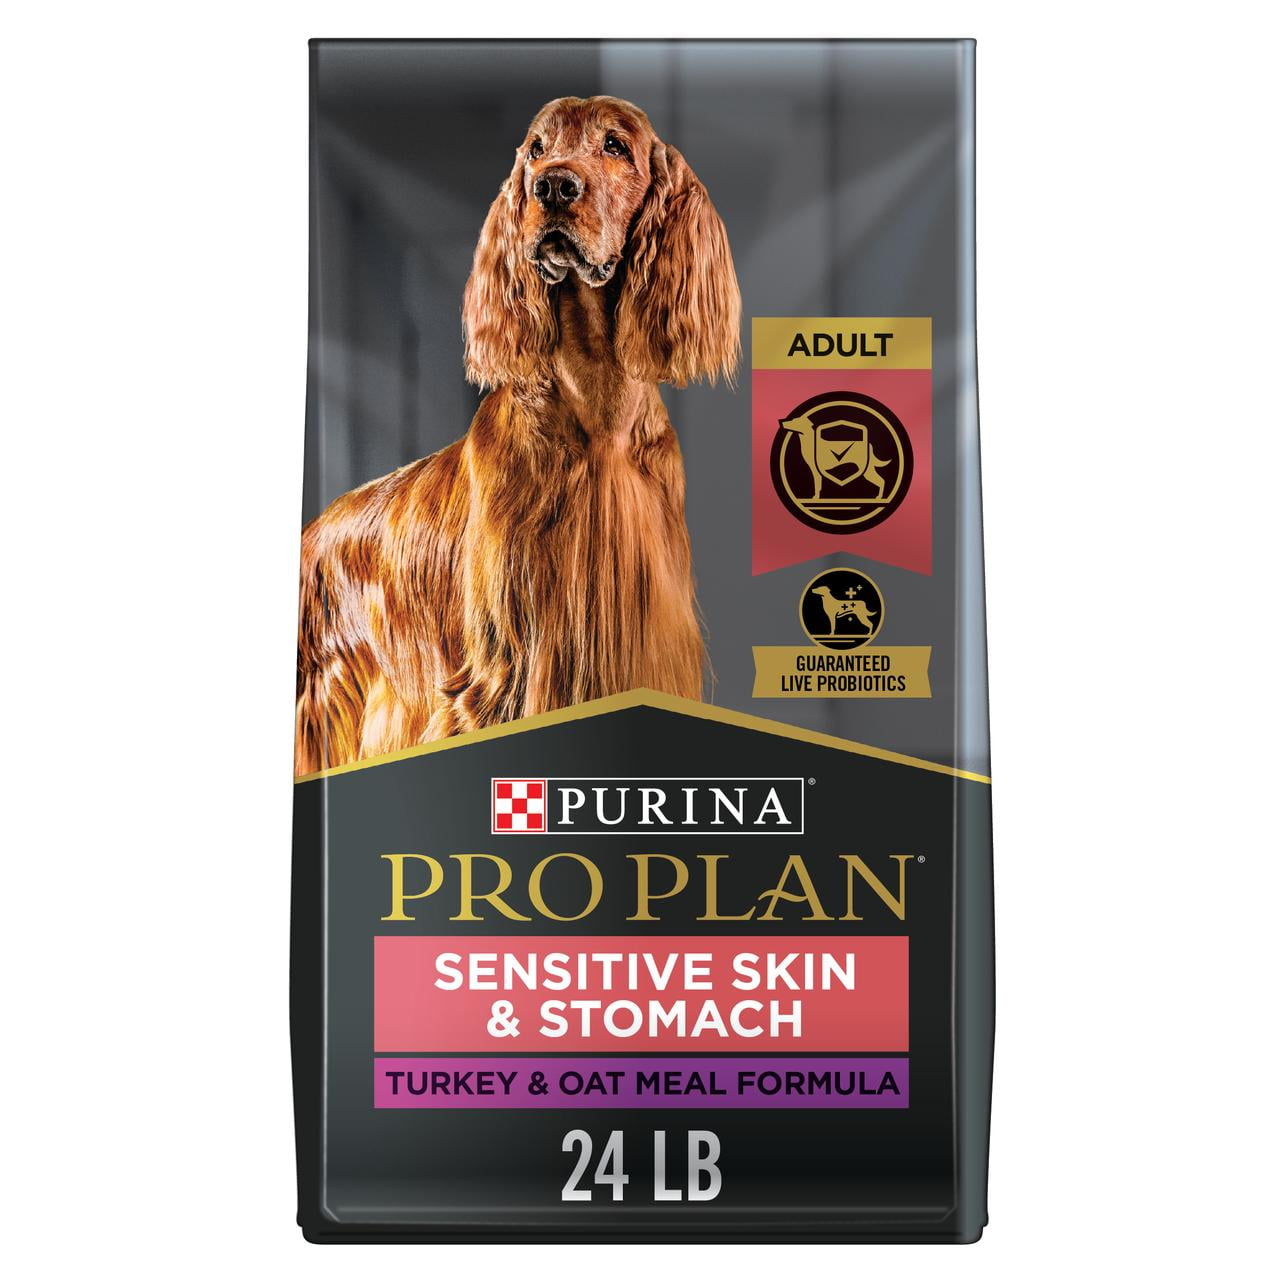 Wholesale prices with free shipping all over United States Purina Pro Plan Sensitive Skin and Stomach Dog Food With Probiotics for Dogs, Turkey & Oat Meal Formula, 24 lb. Bag - Steven Deals